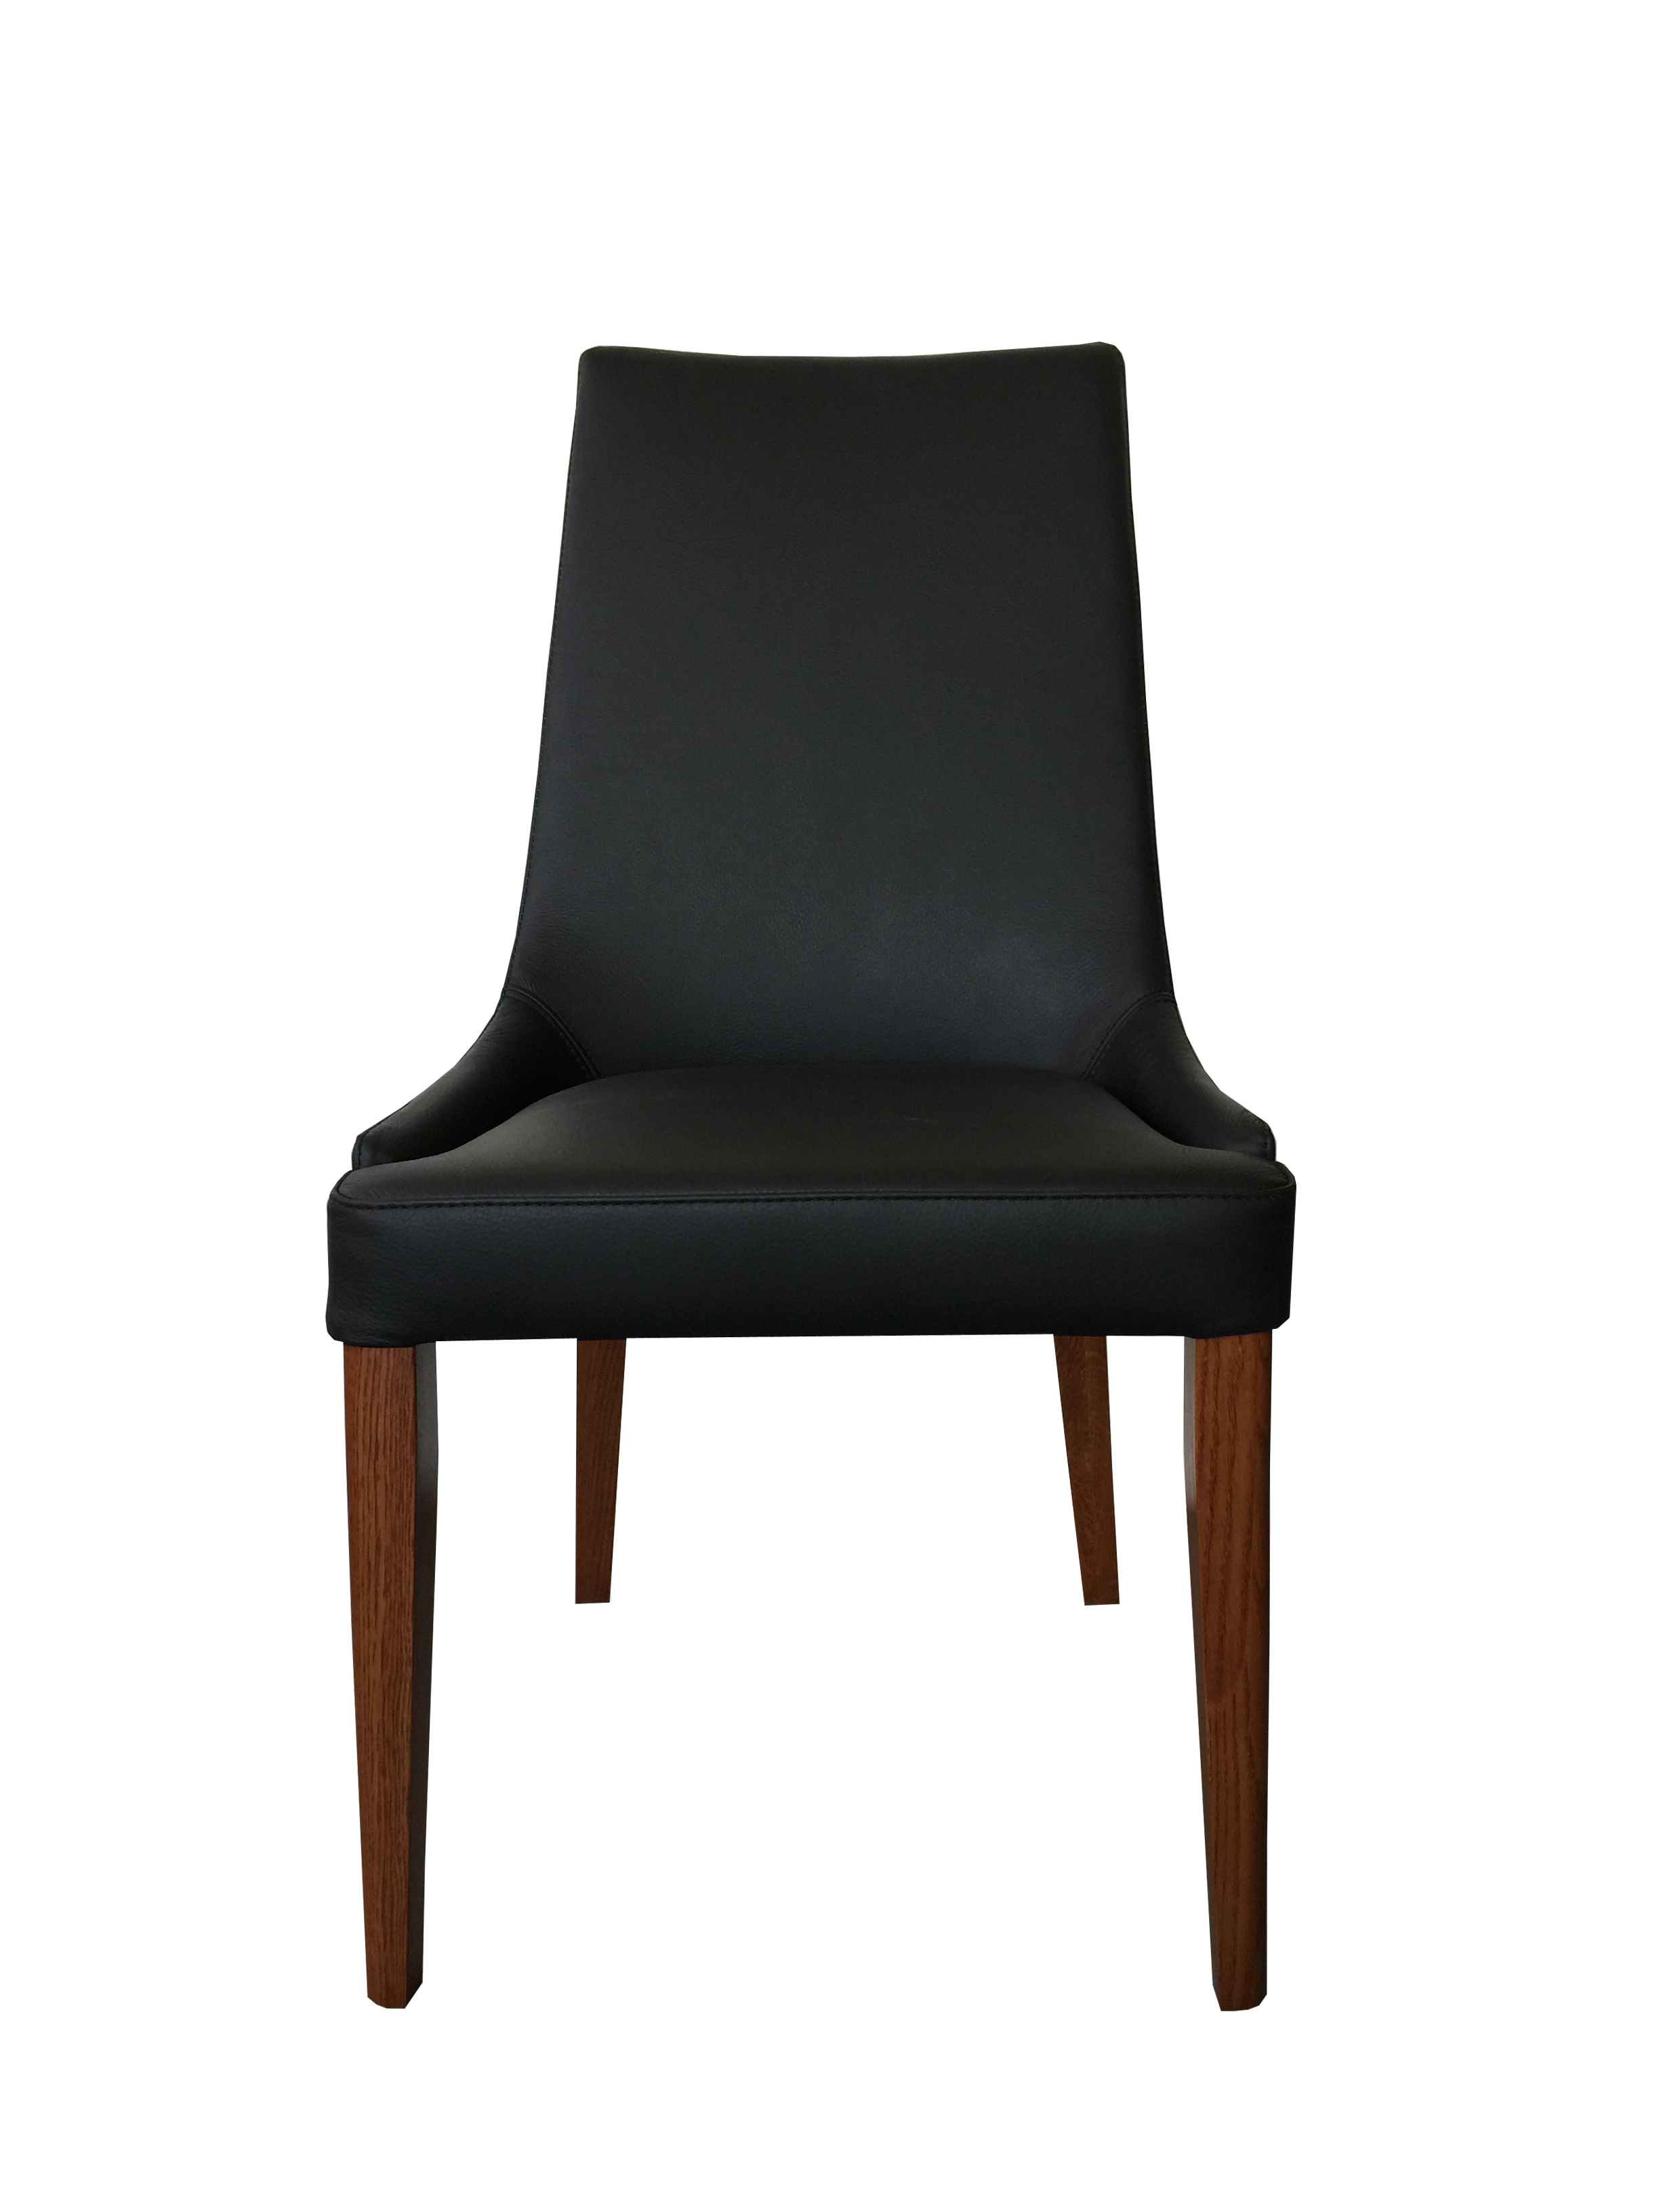 leather chair black